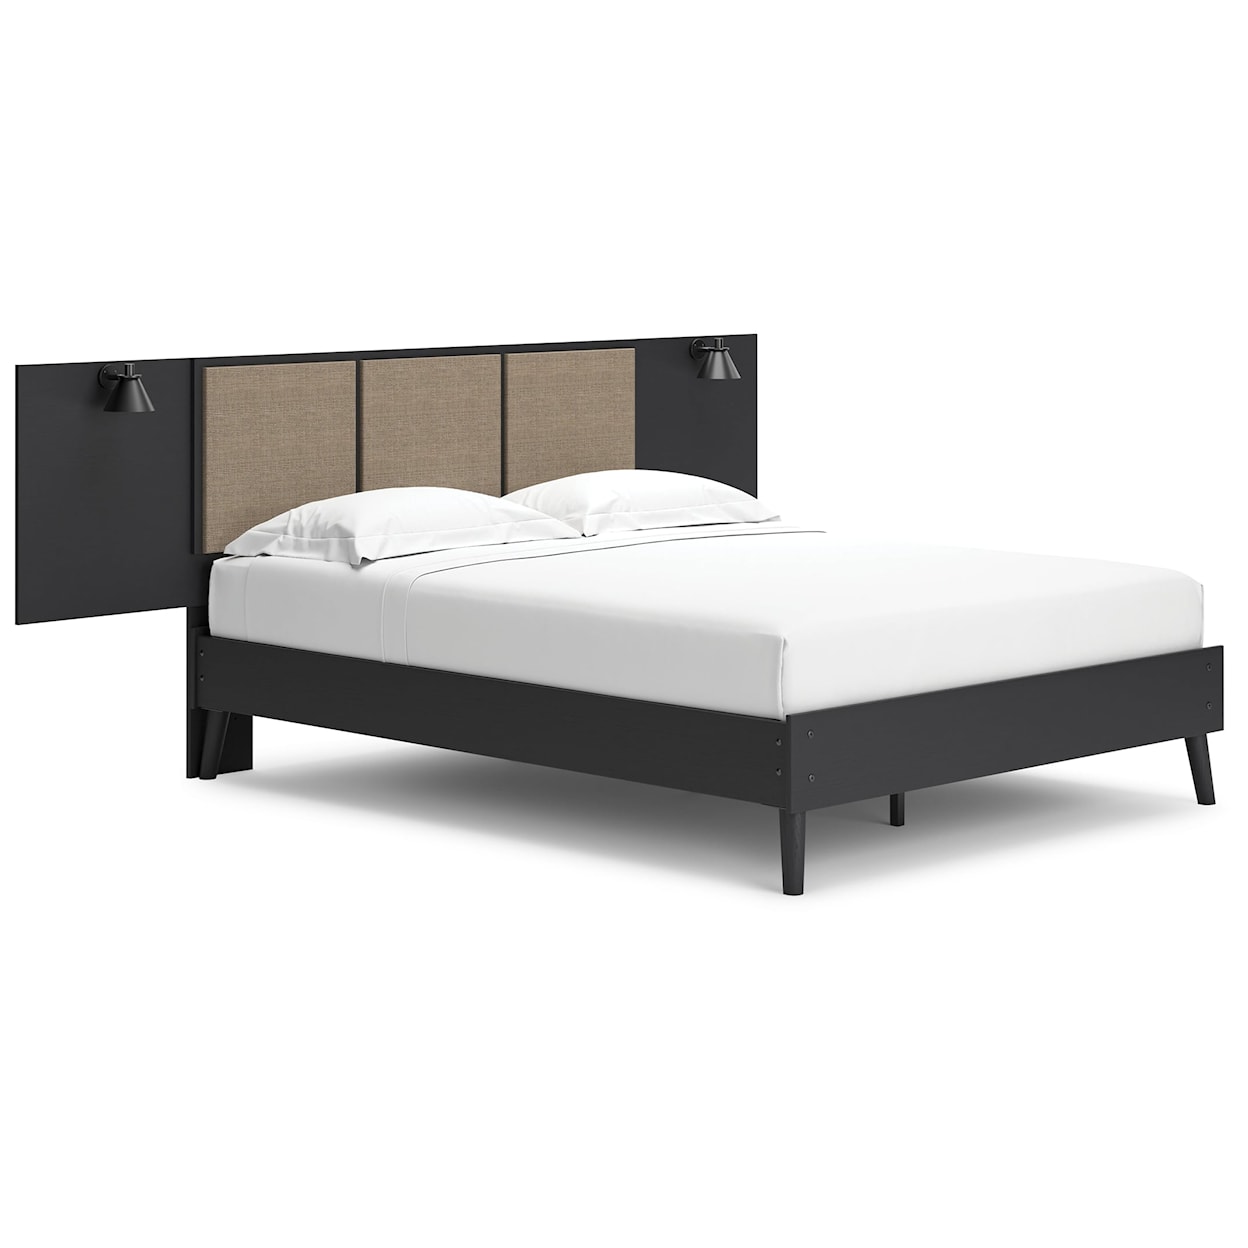 Ashley Signature Design Charlang Queen Panel Platform Bed with 2 Extensions